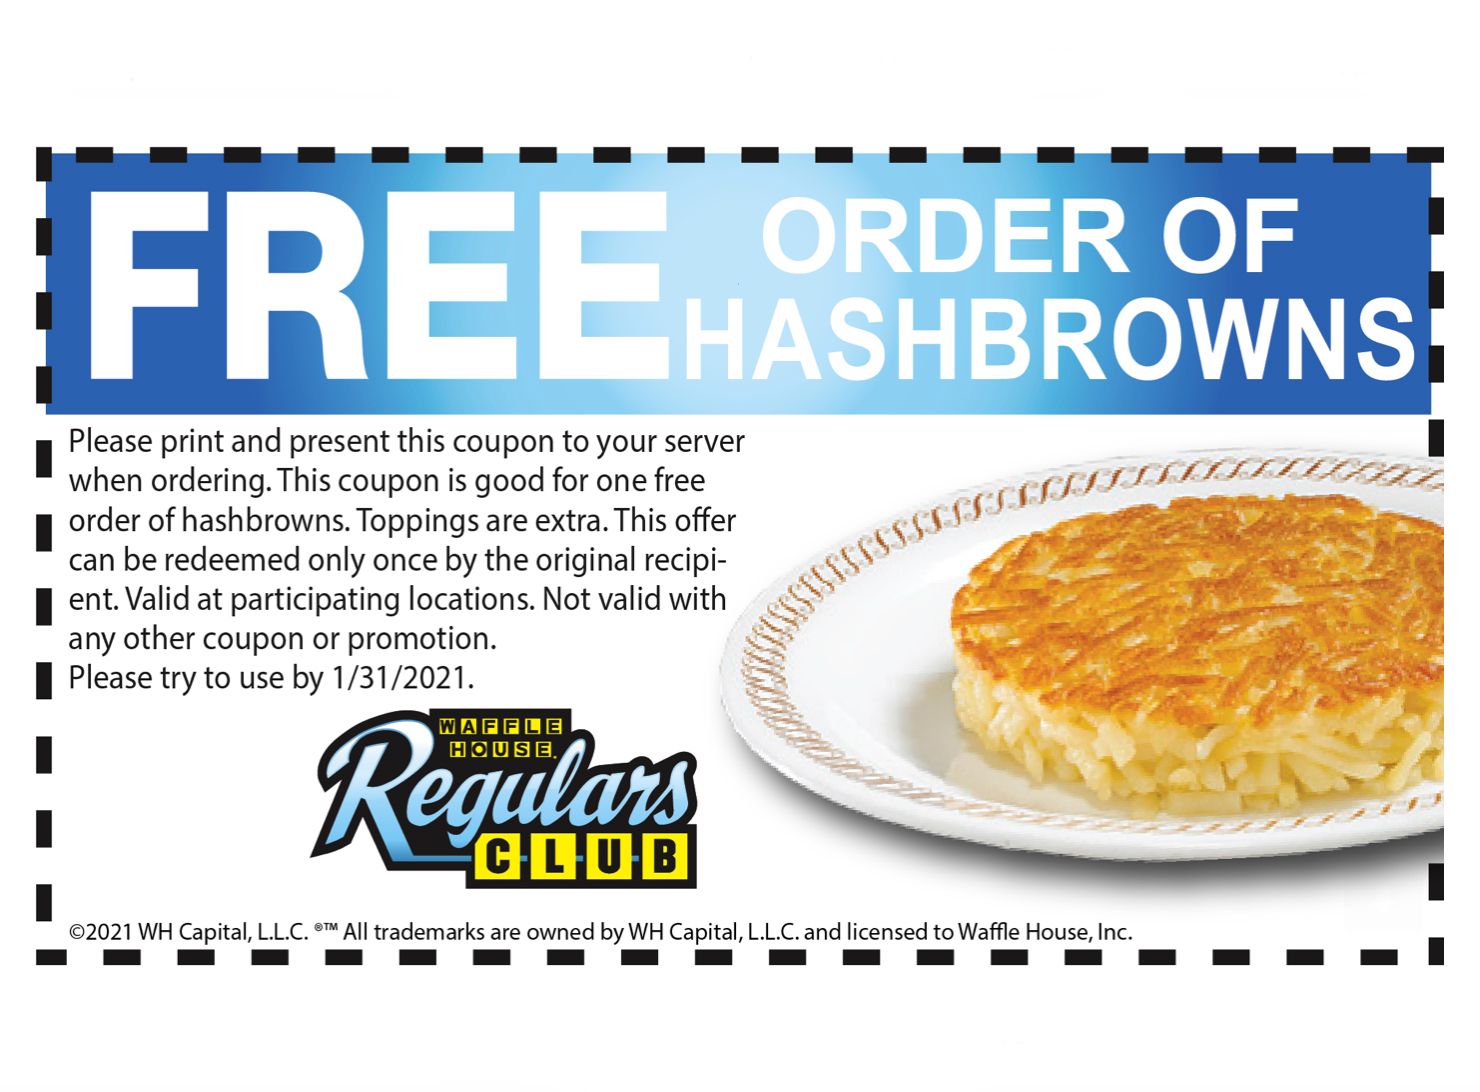 Waffle House Has Just Sent Out a New Free Hashbrown Coupon to All Regulars Club Members